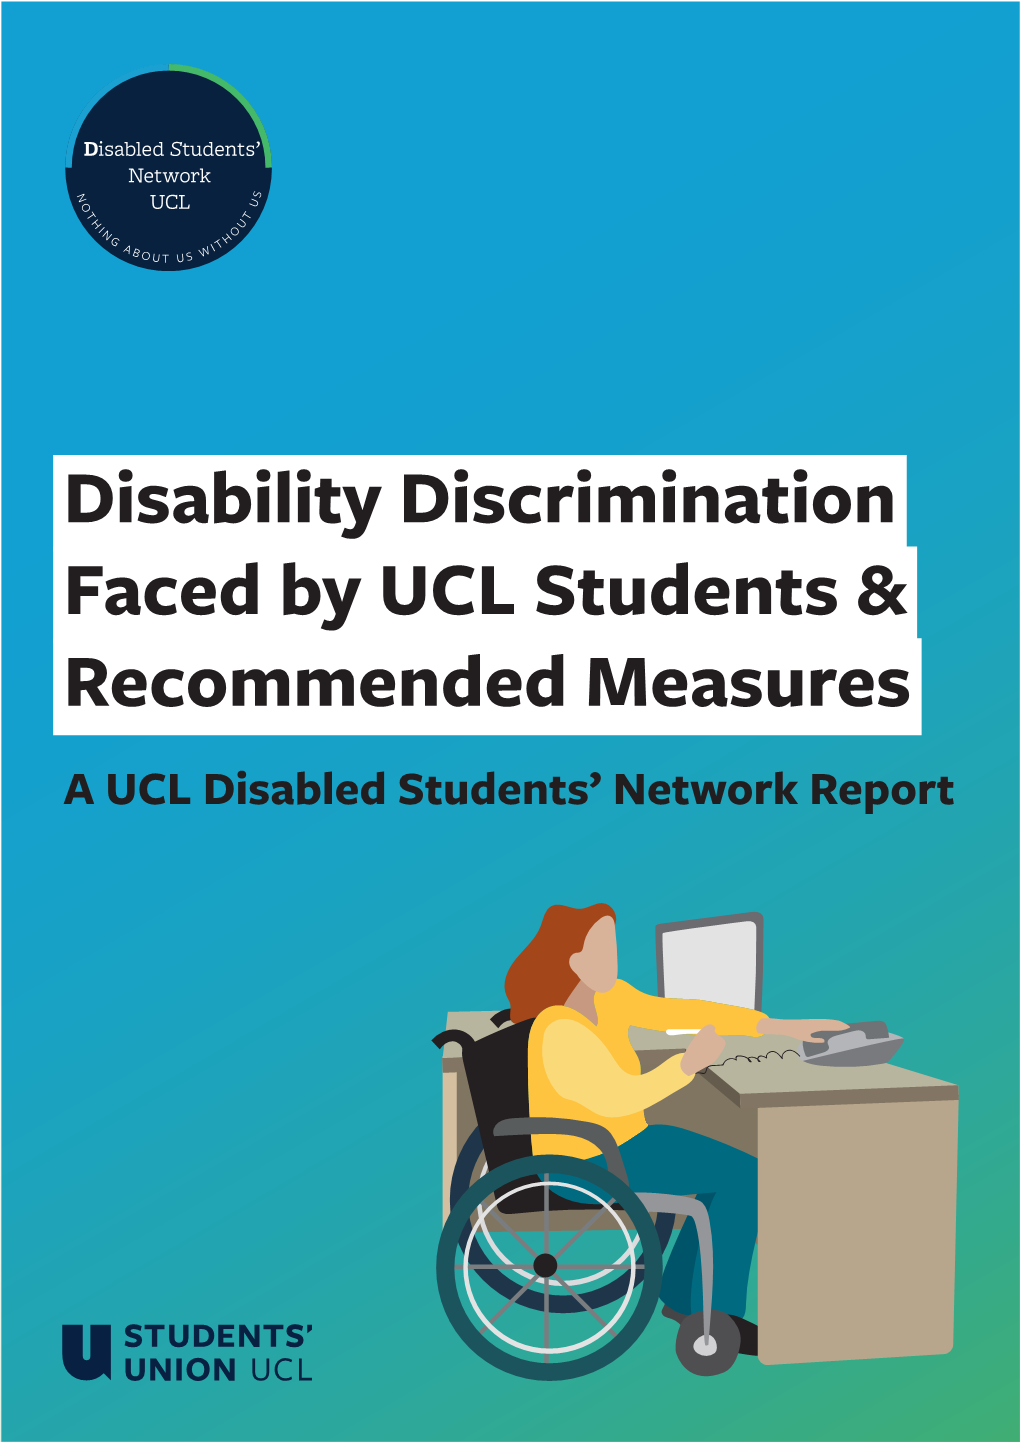 Disability Discrimination Faced by UCL Students & Recommended Measures